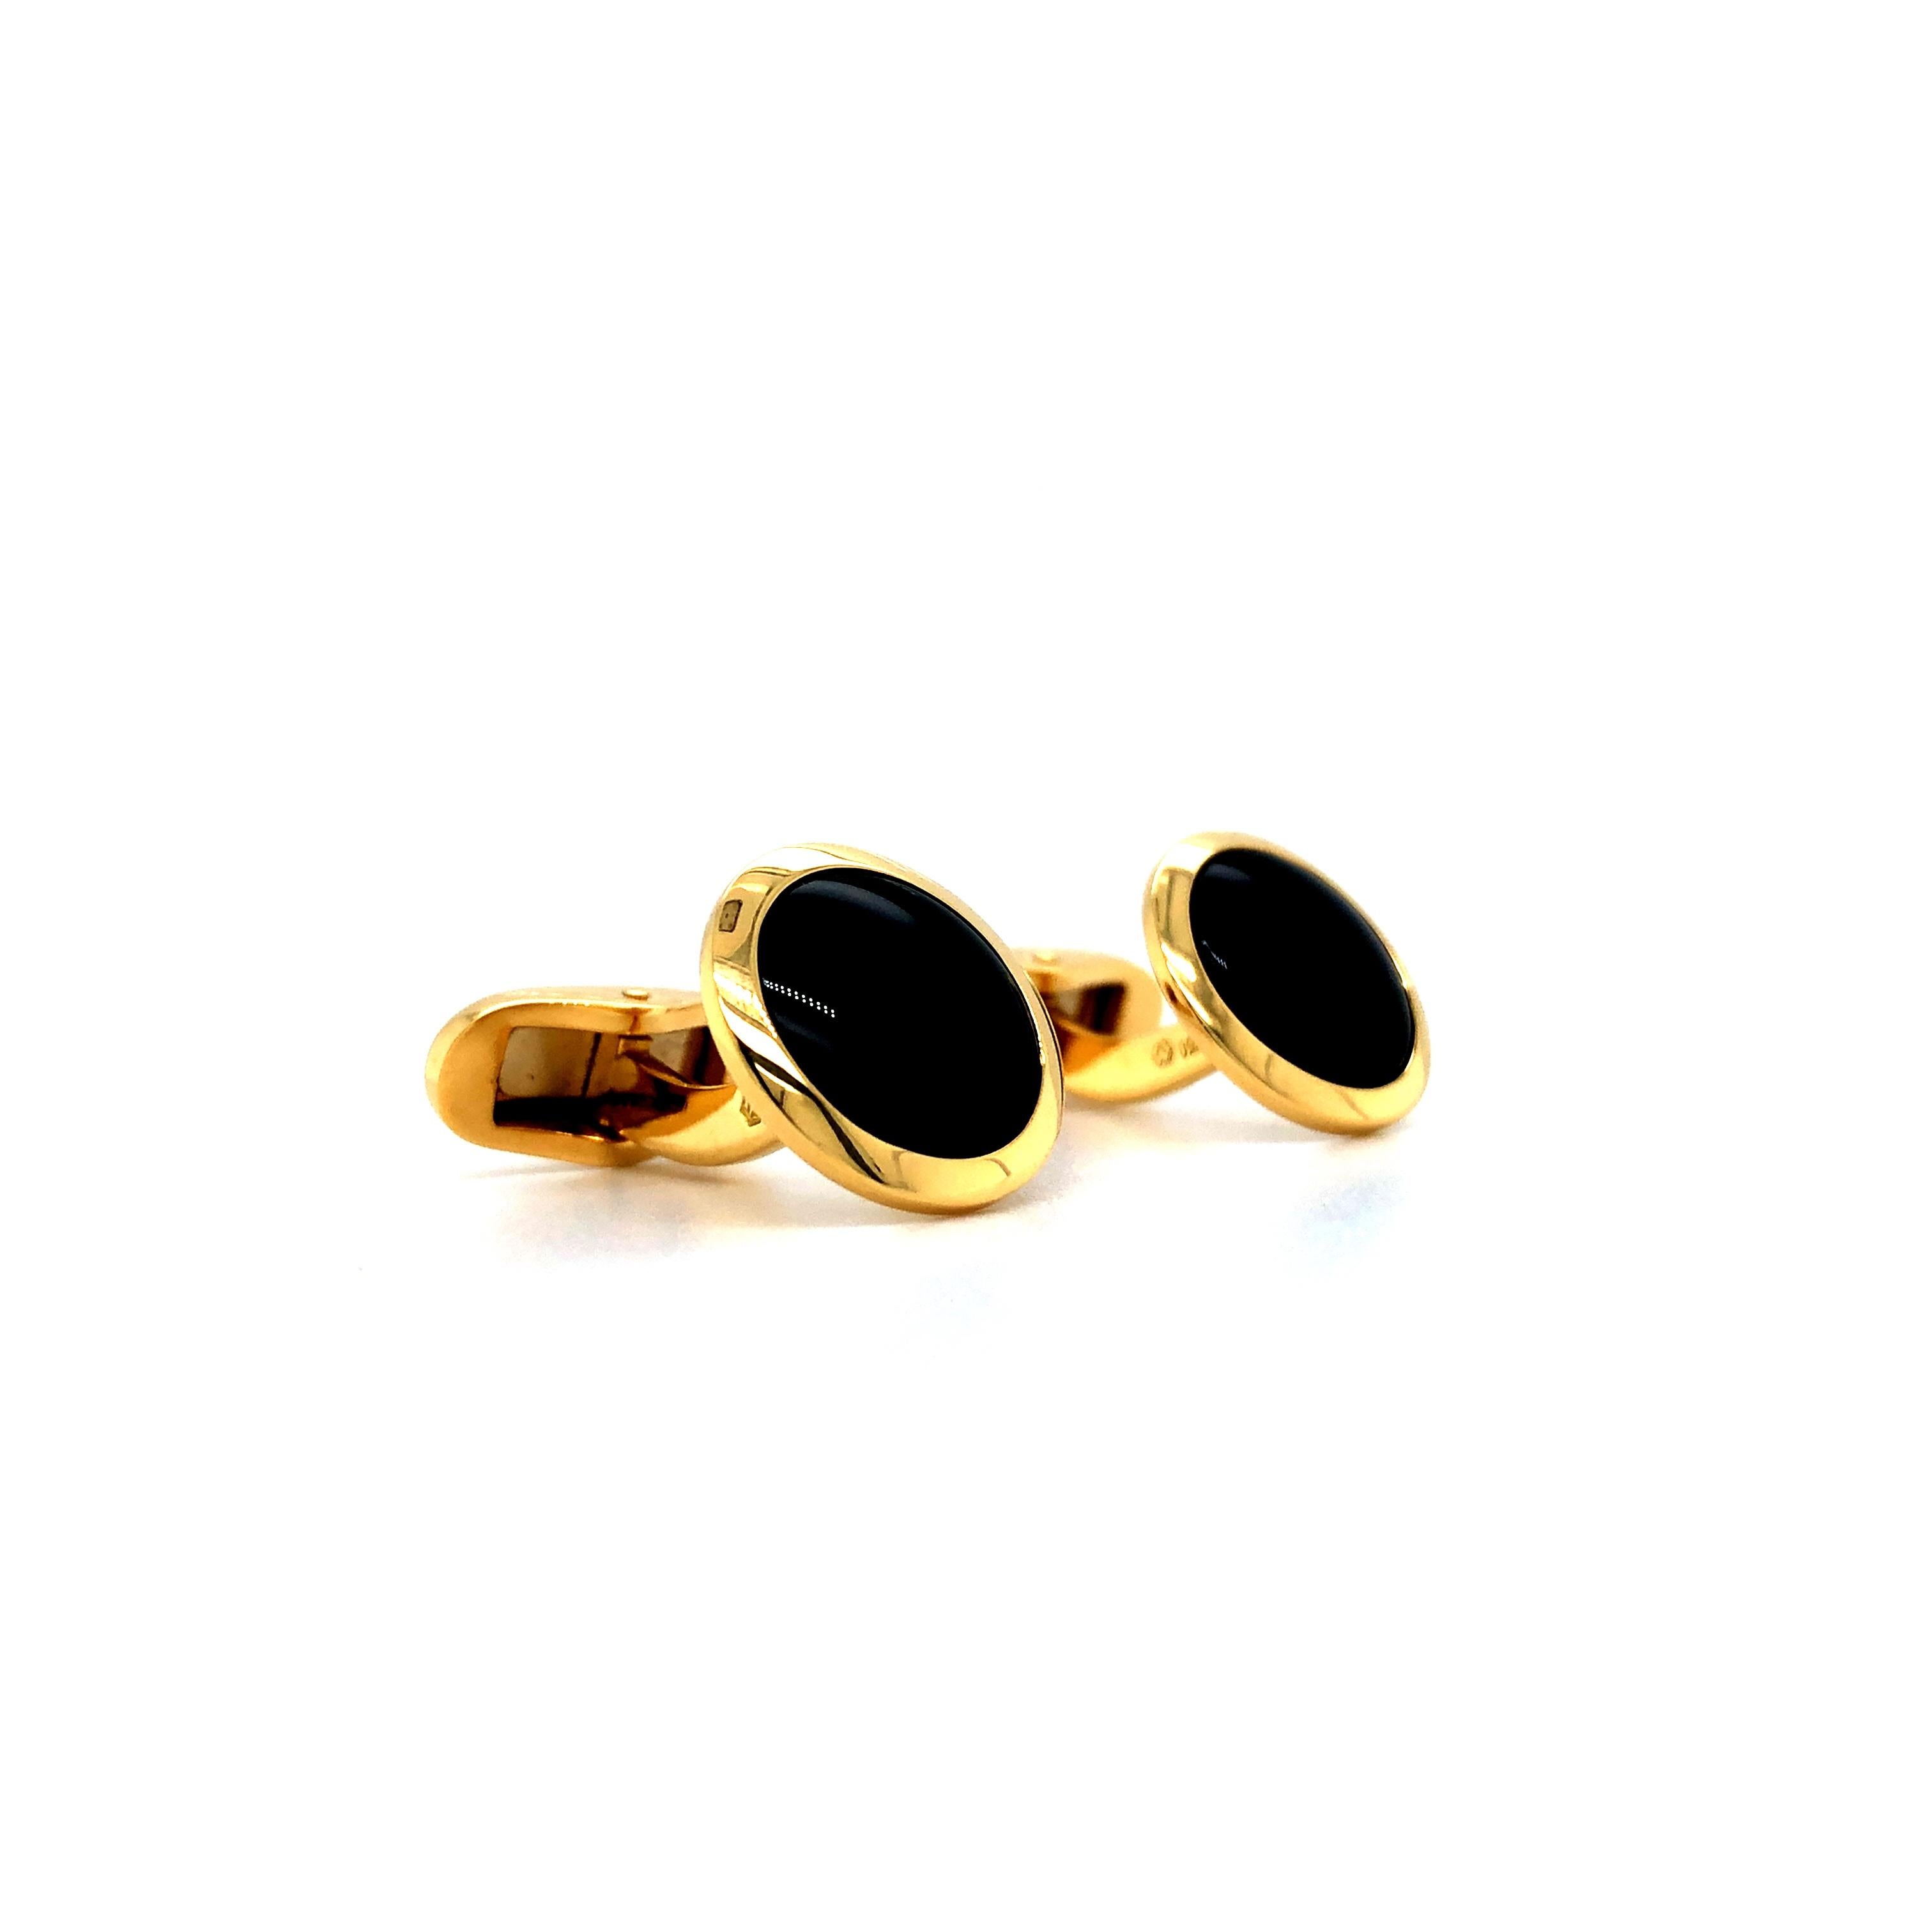 Women's or Men's Round Cufflinks with Domed Bezel, 18k Yellow Gold, Onyx Inlays For Sale